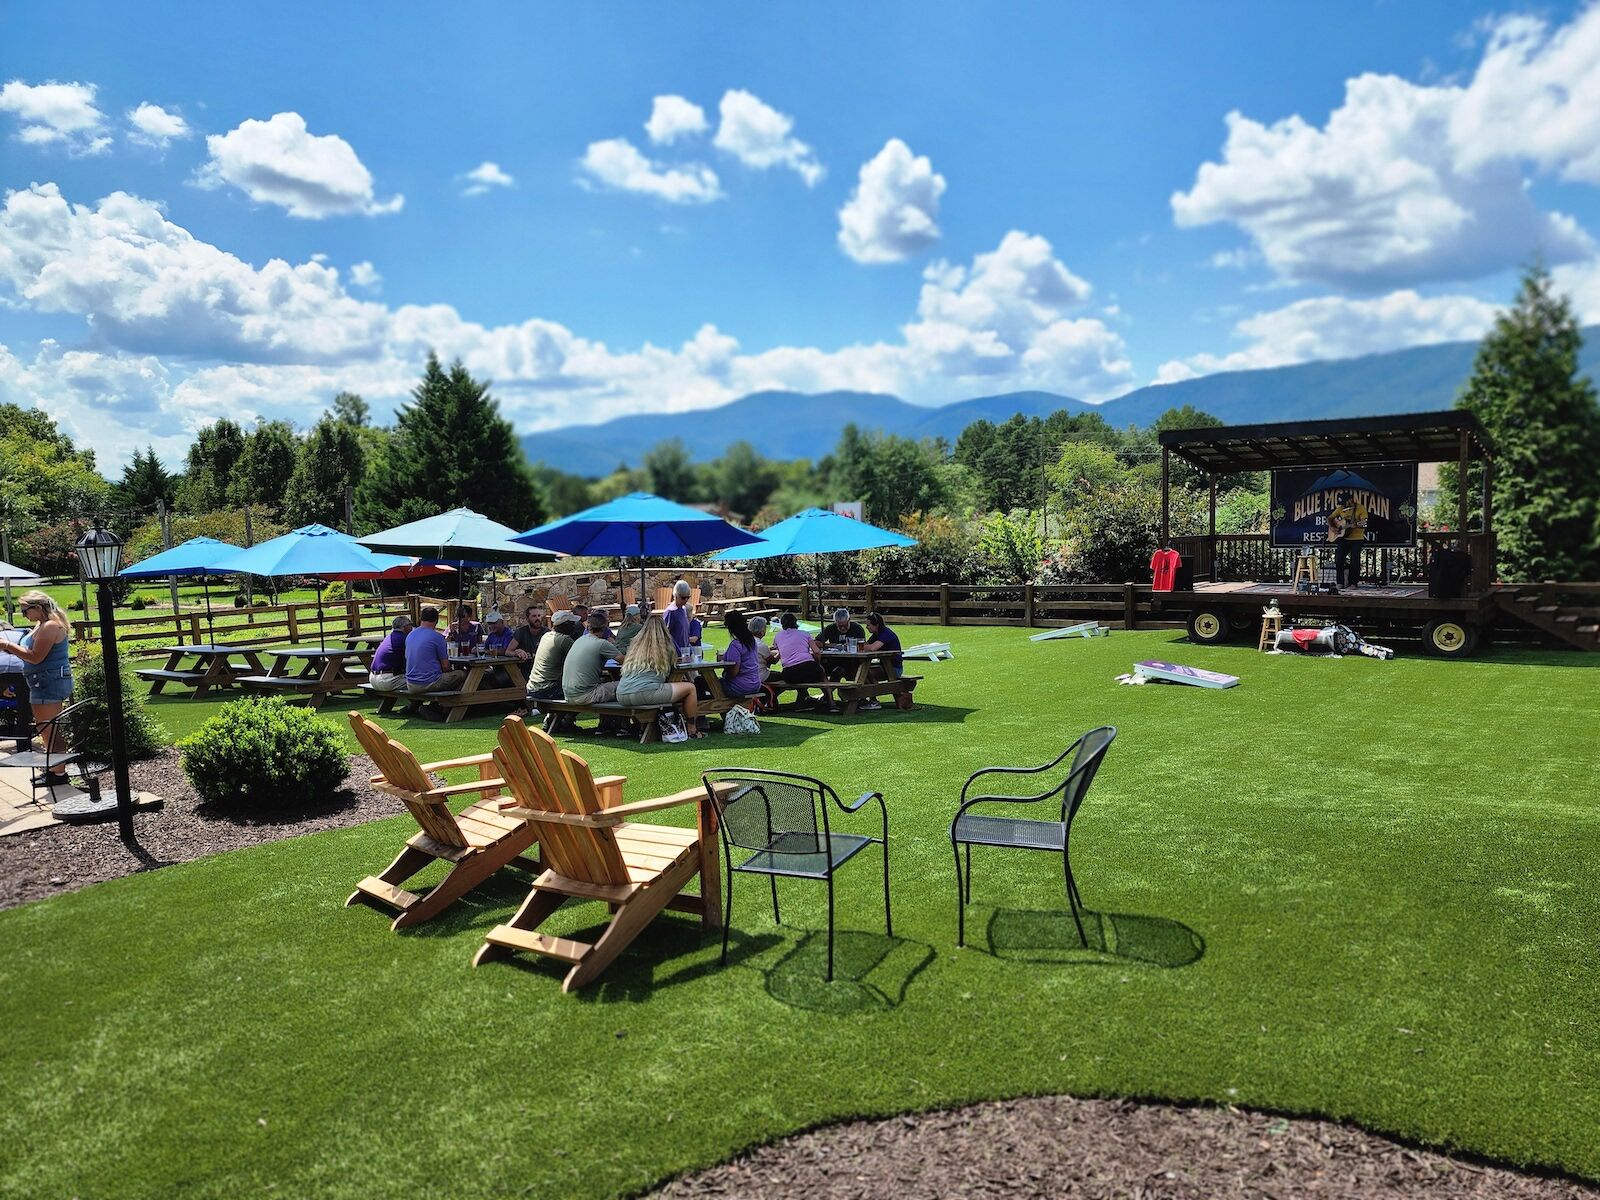 Lawn and stage at Blue Moutain Brewery with people sitting at tables under blue umbrellas on Nelson 151